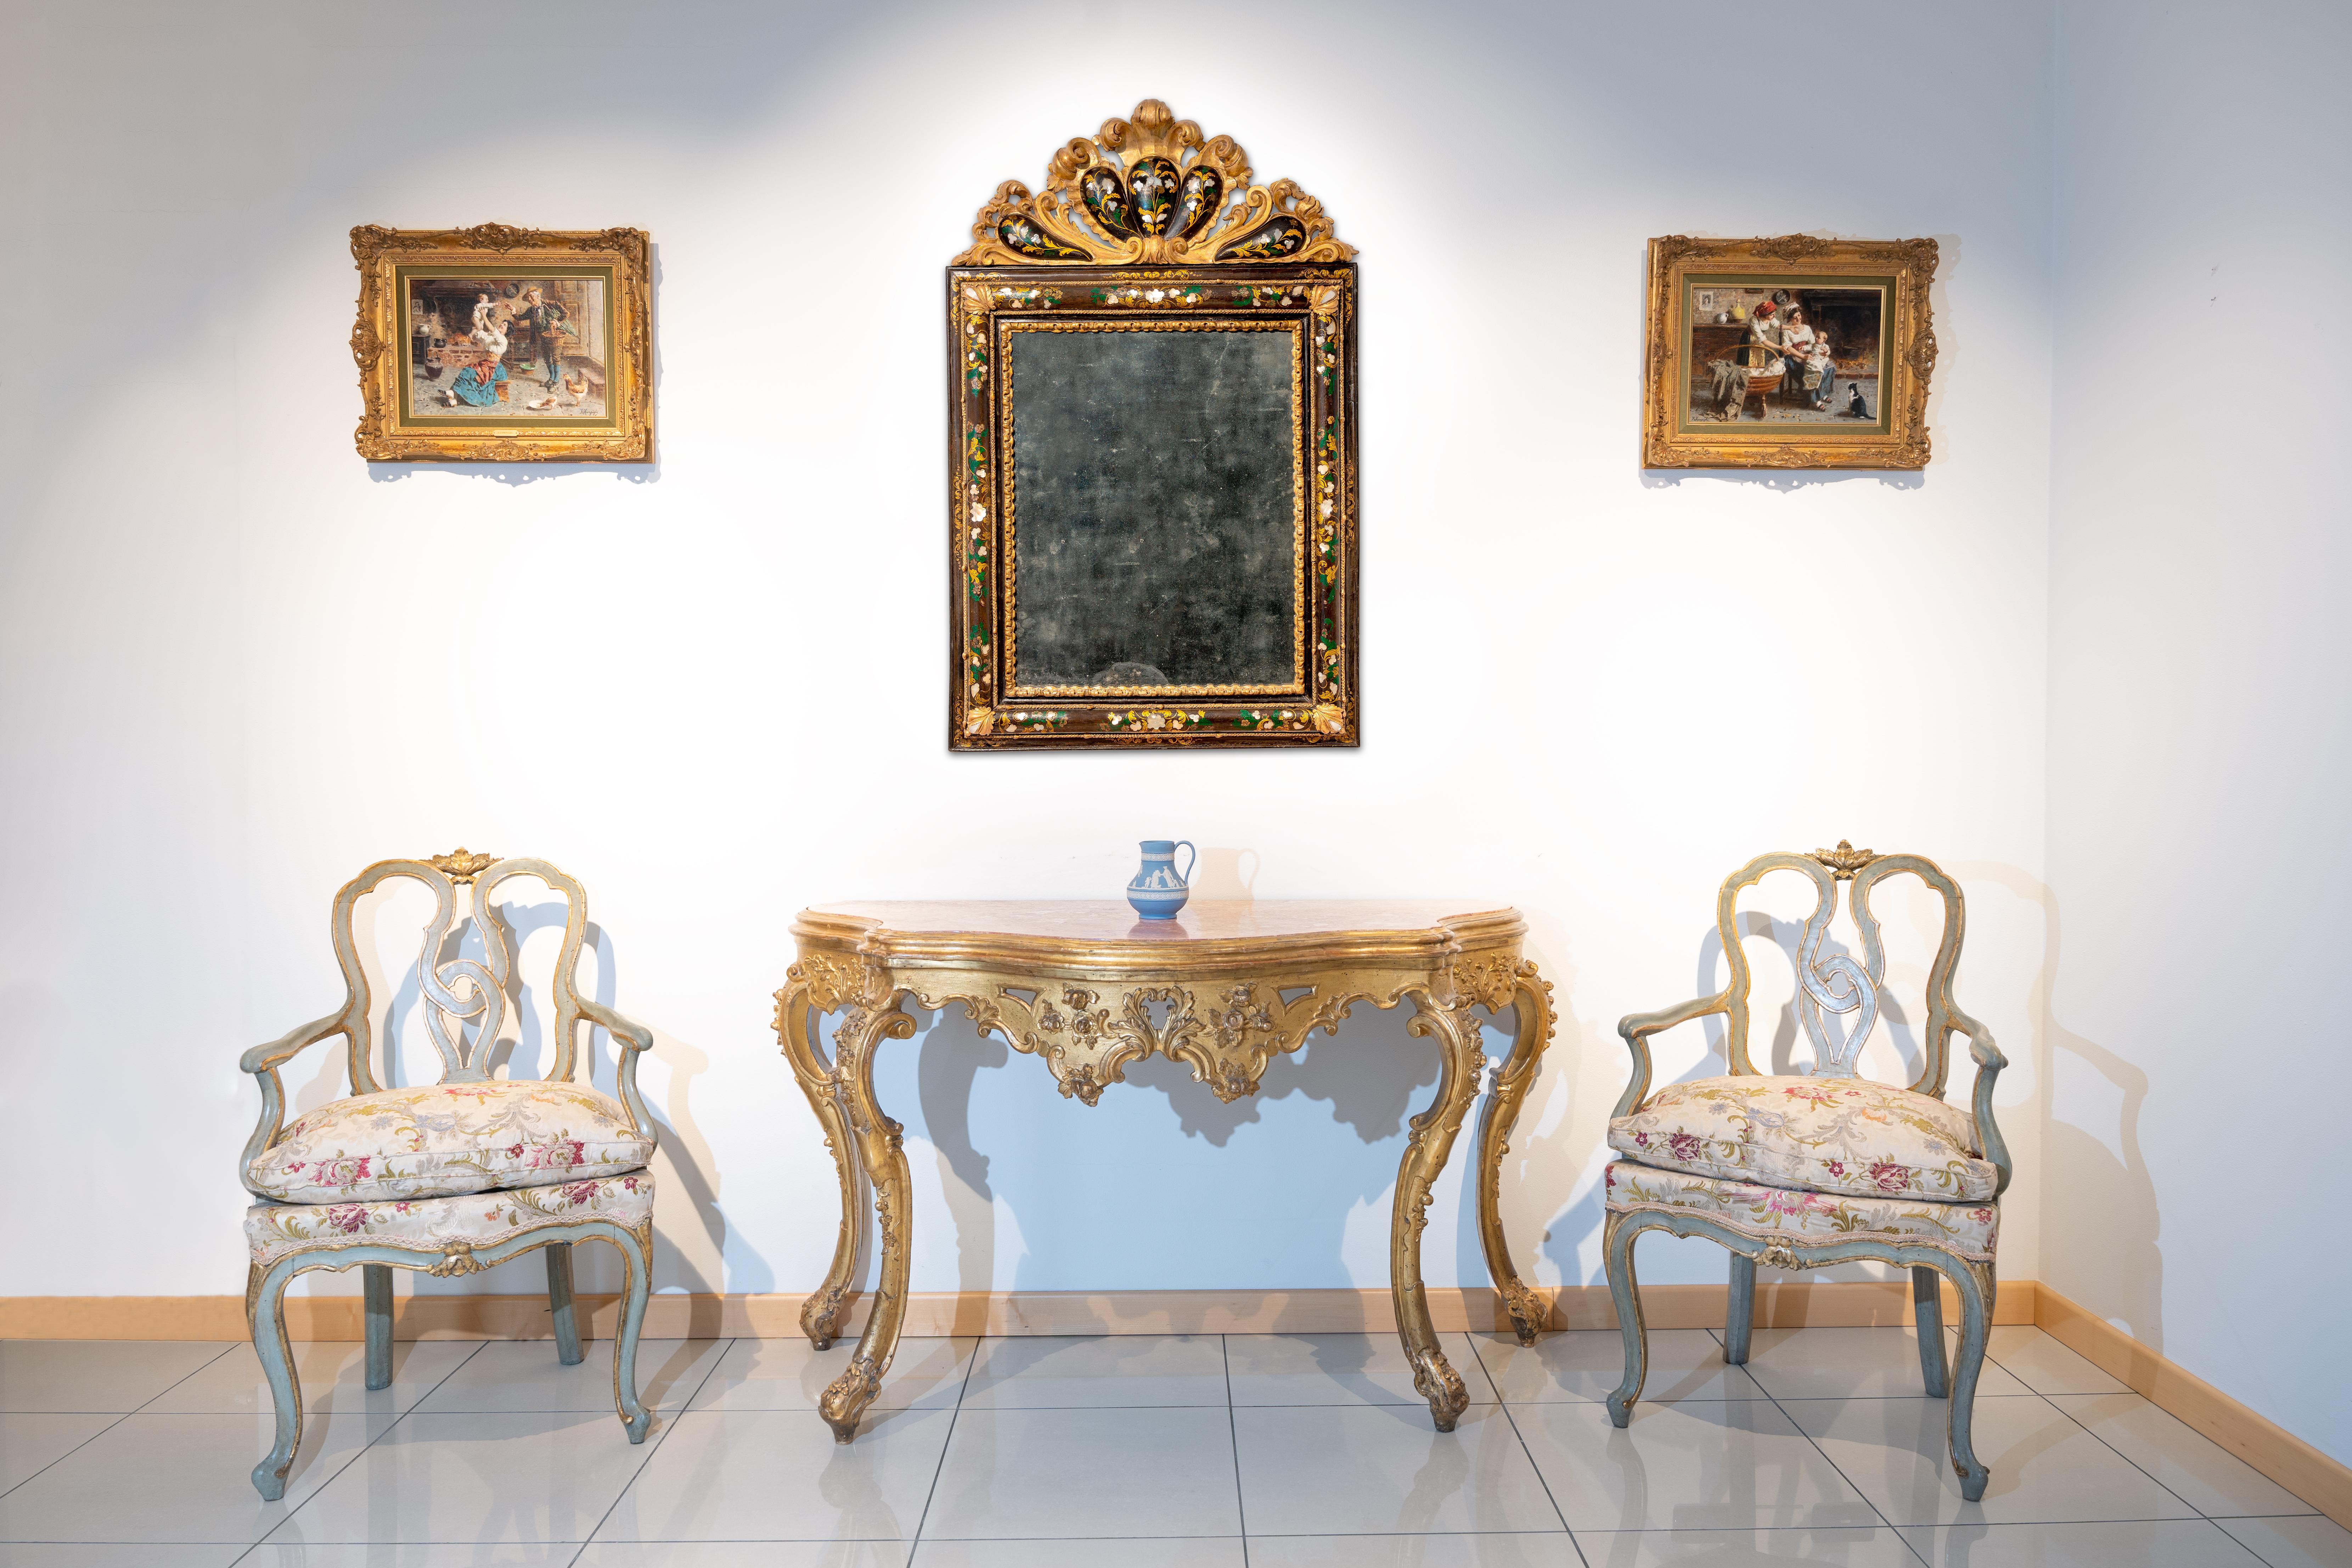 Italian Eighteenth-century Venetian mirror in lacquered wood and with mother-of-pearl in For Sale